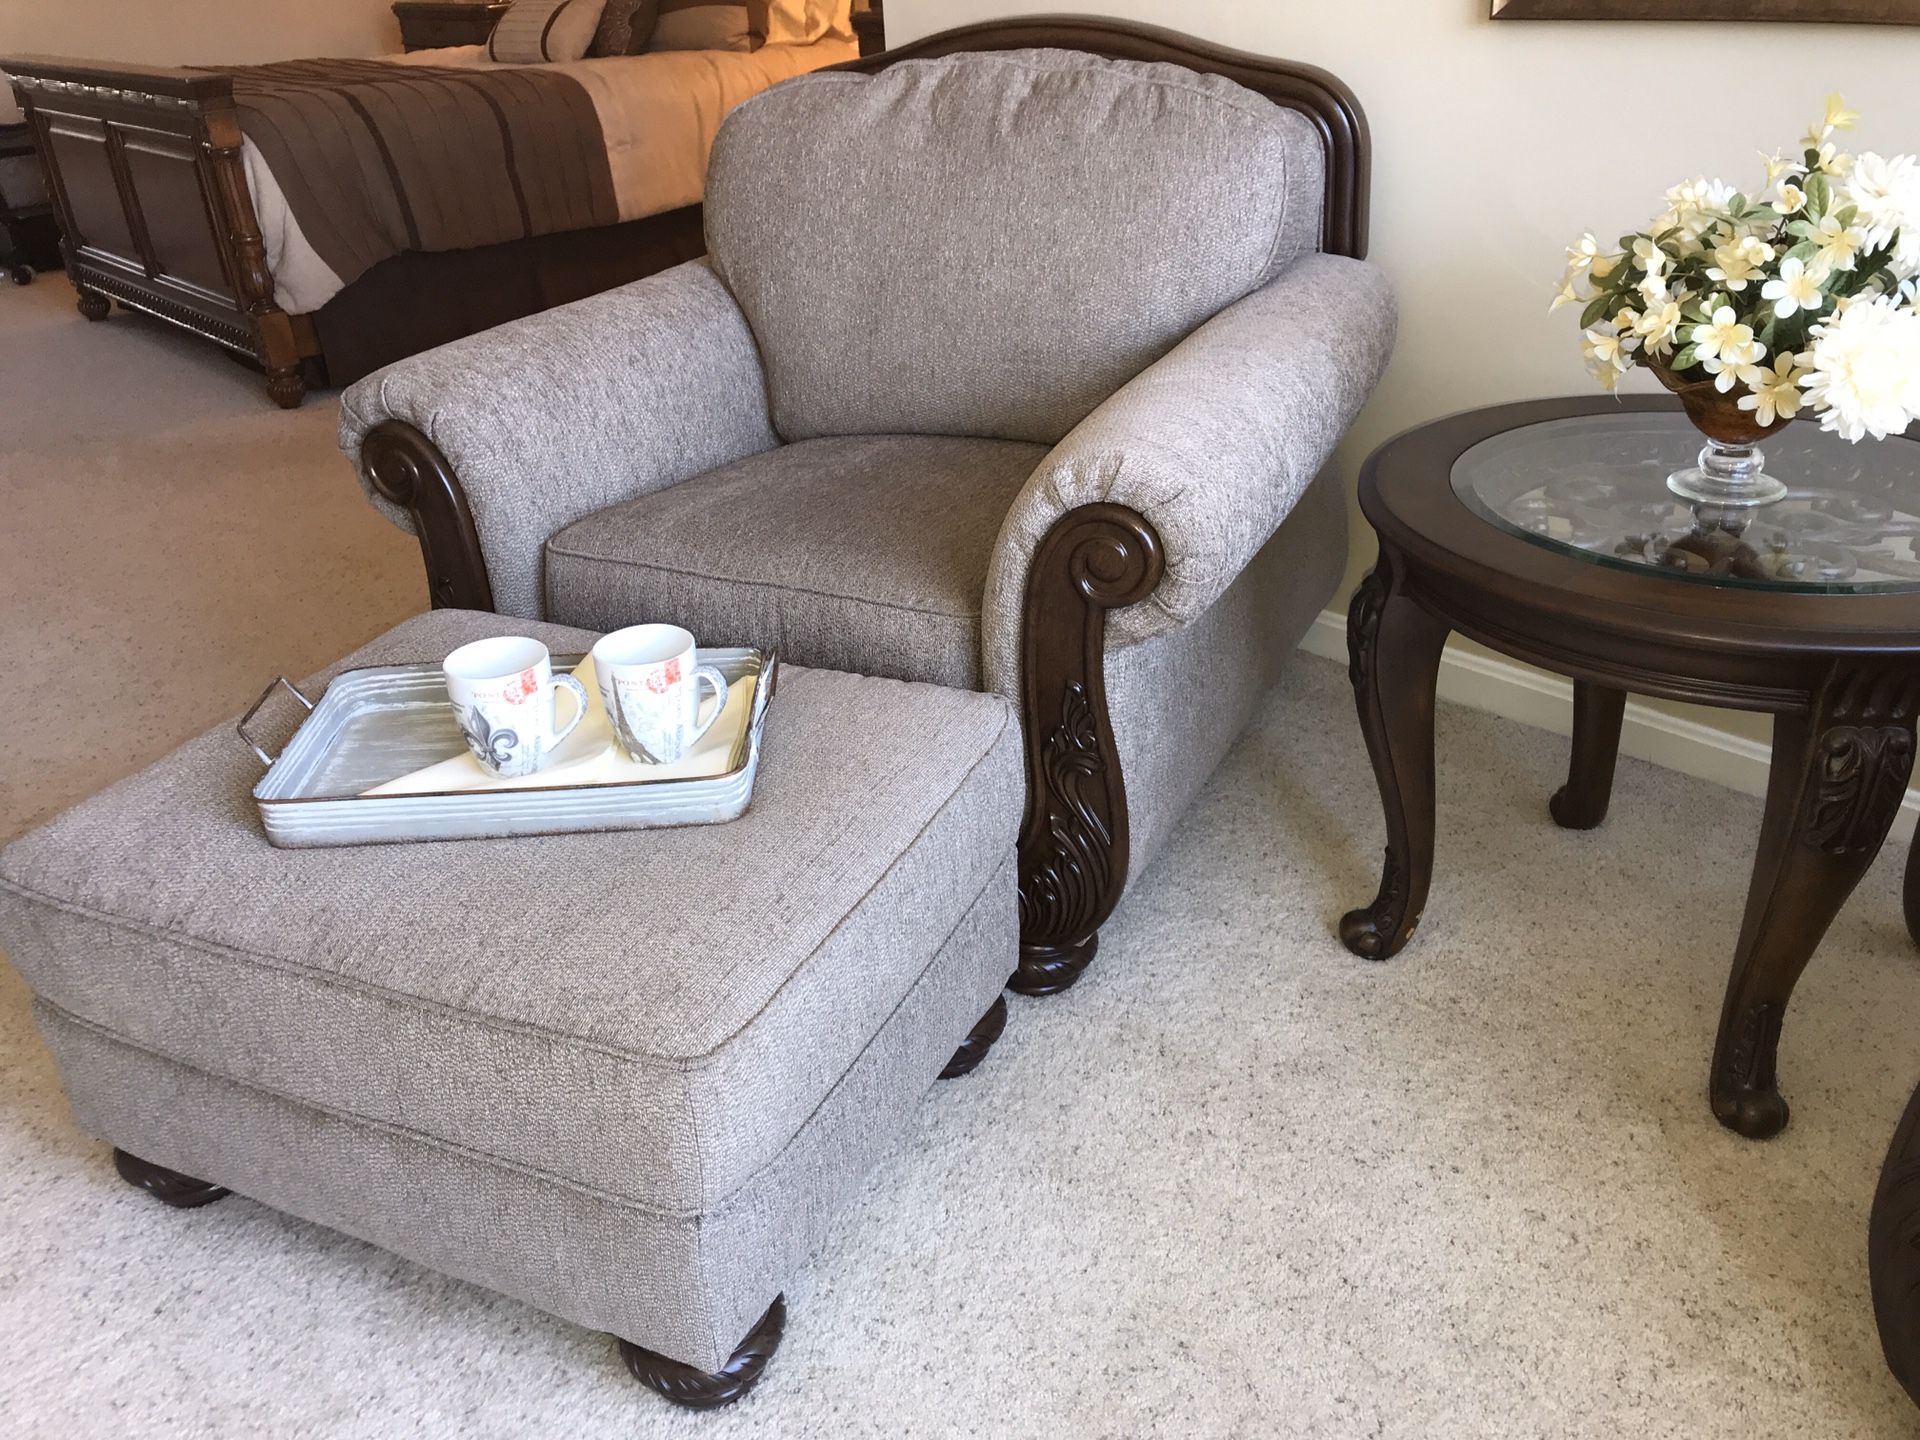 Pair of overstuffed lounge chairs, ottoman, and round table